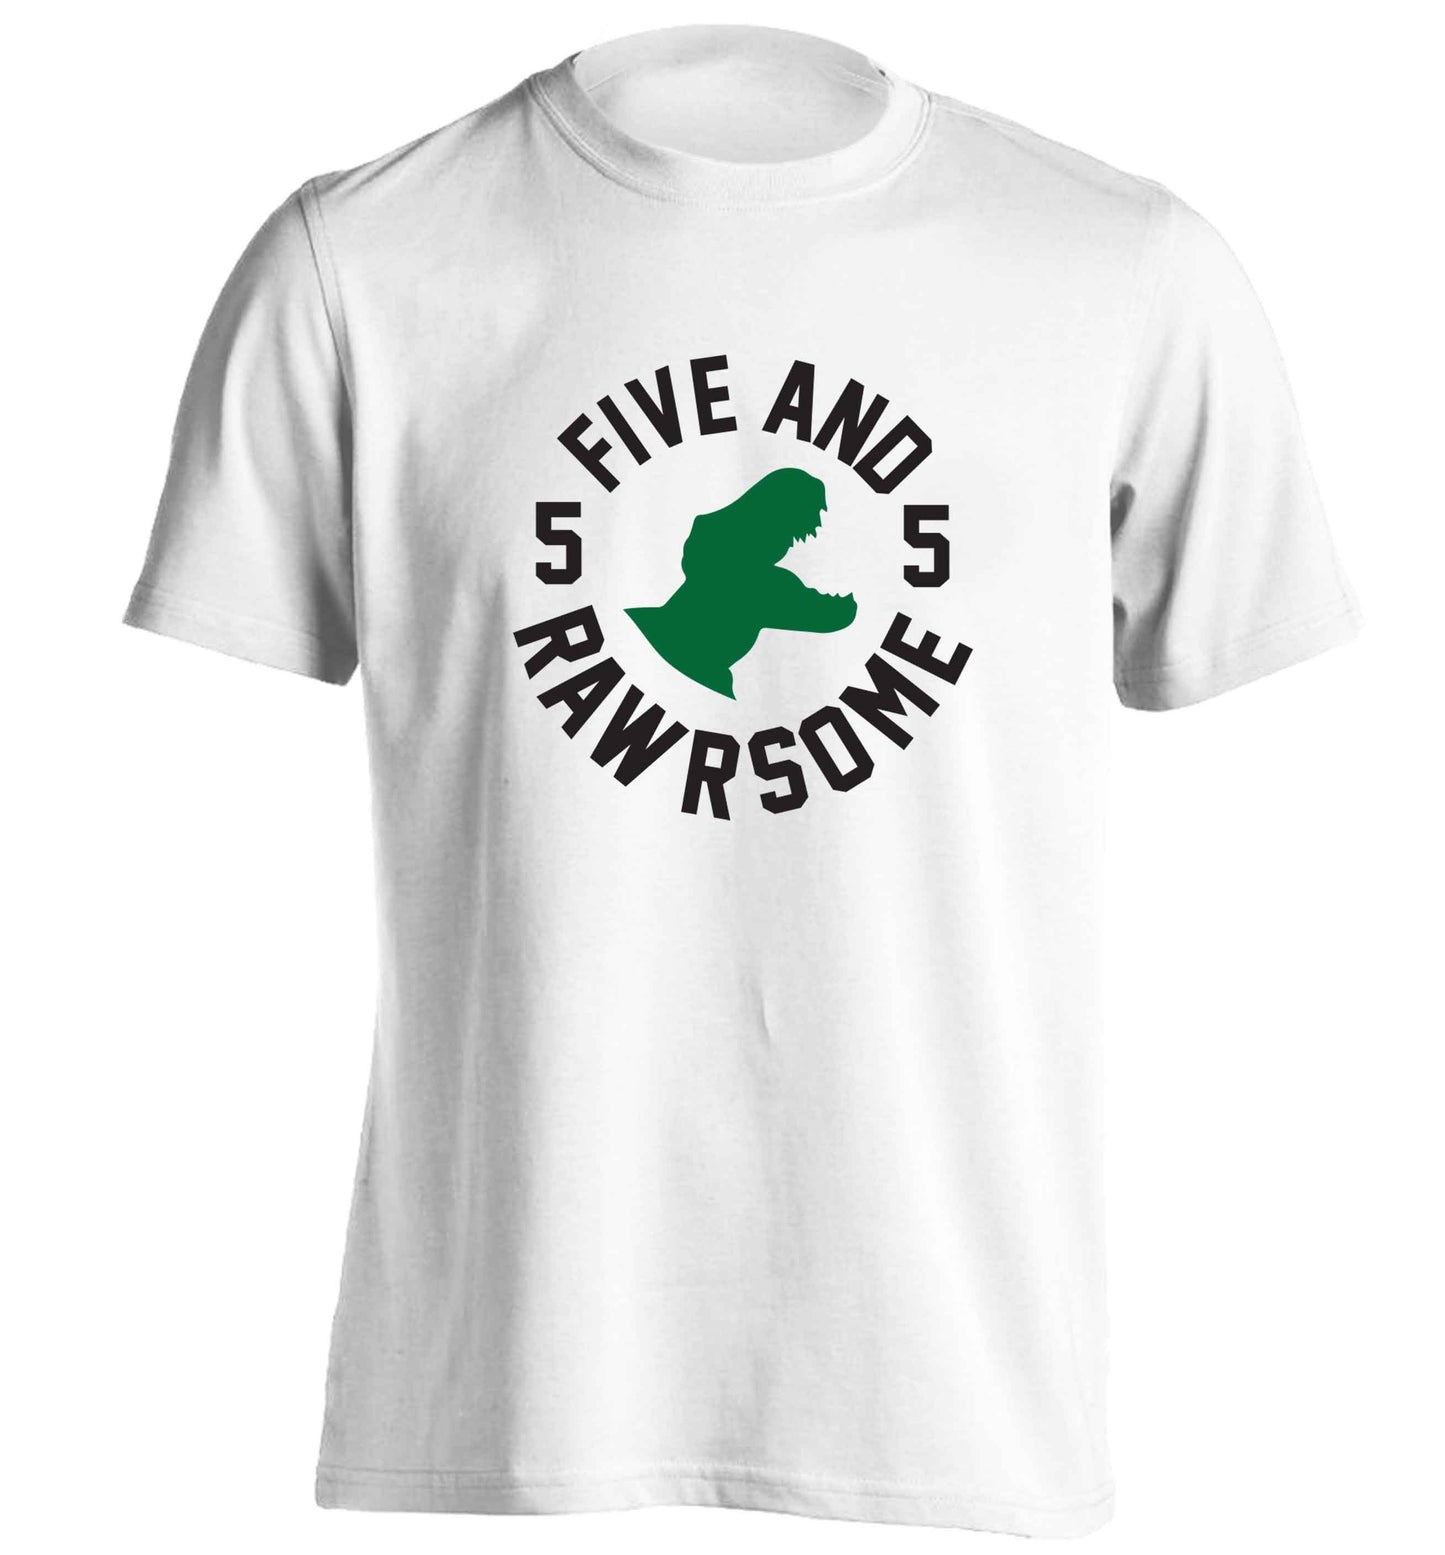 Five and rawrsome adults unisex white Tshirt 2XL